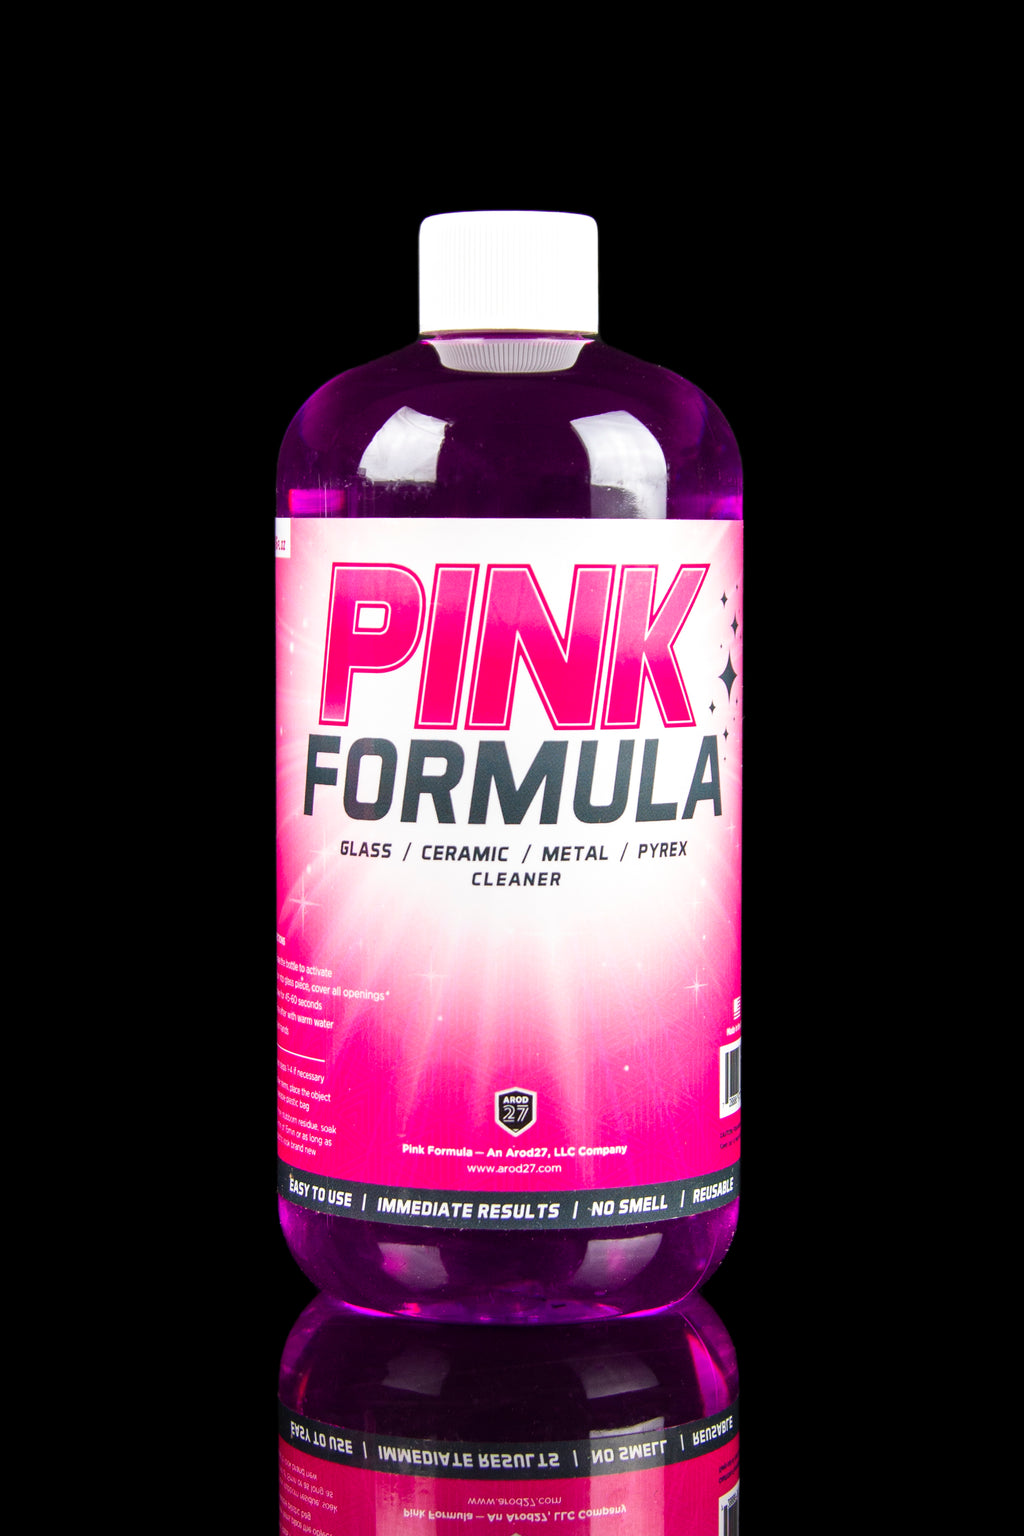 Pink Formula + Abrasive 𝟒𝟐𝟎 & 710 Glass Cleaner - Bubble Gum Scented  Strong Cleaning Solution for Glass, Ceramic, & Metal Surfaces - Made with